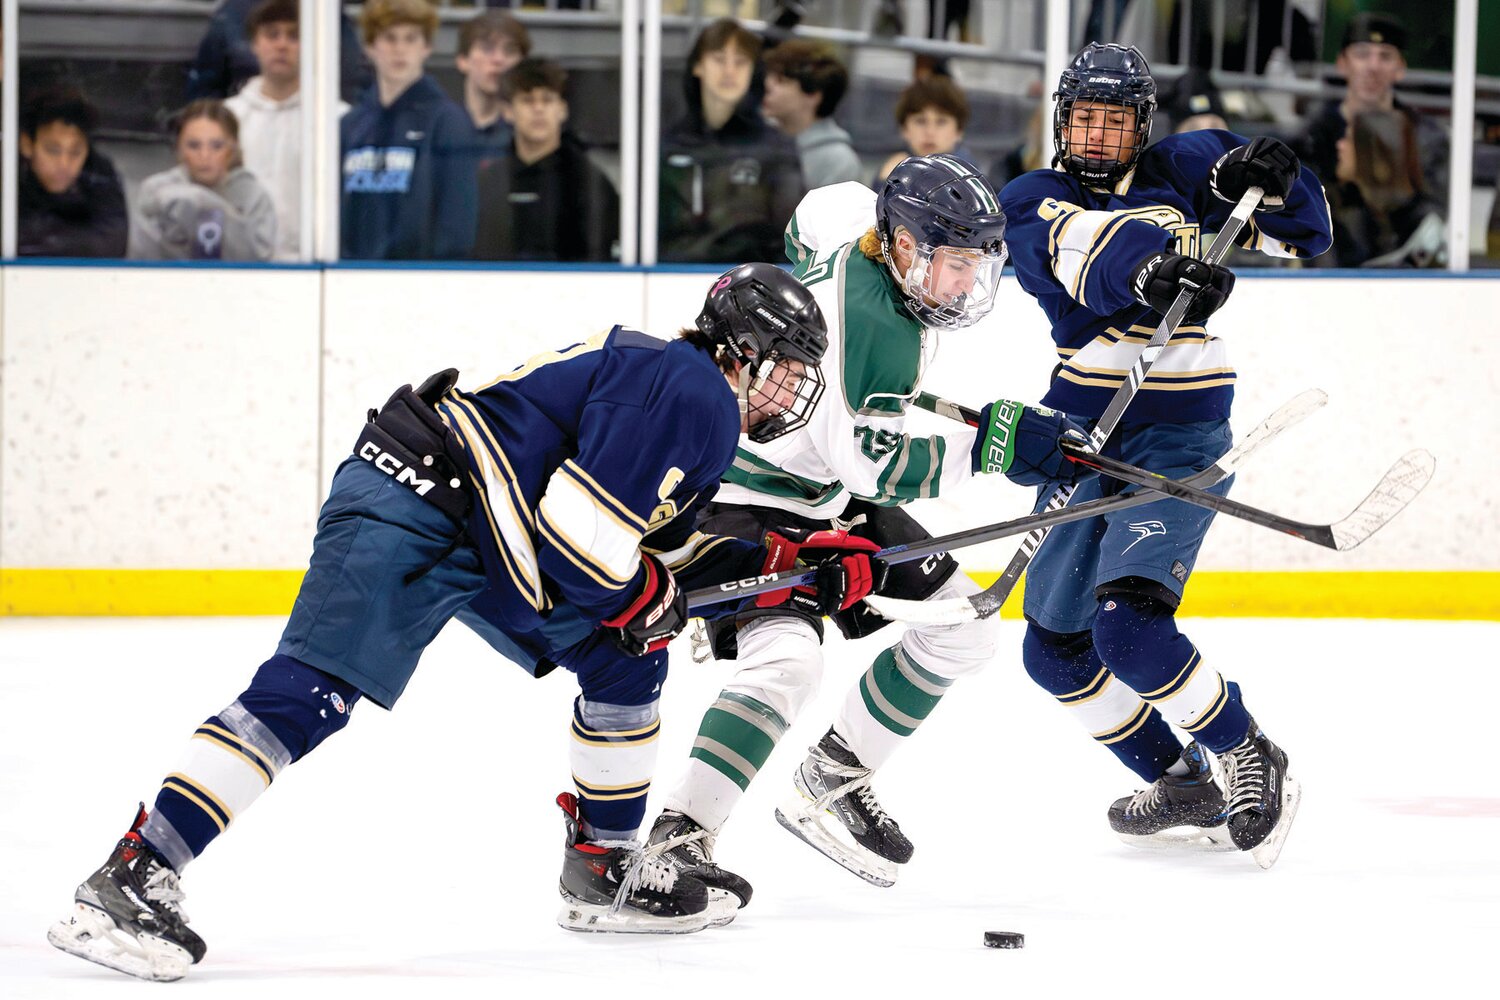 Council Rock South’s Jake Weiner stick checks the puck away from Pennridge’s Kevin Pico during the second period of the Suburban High School Hockey League final.